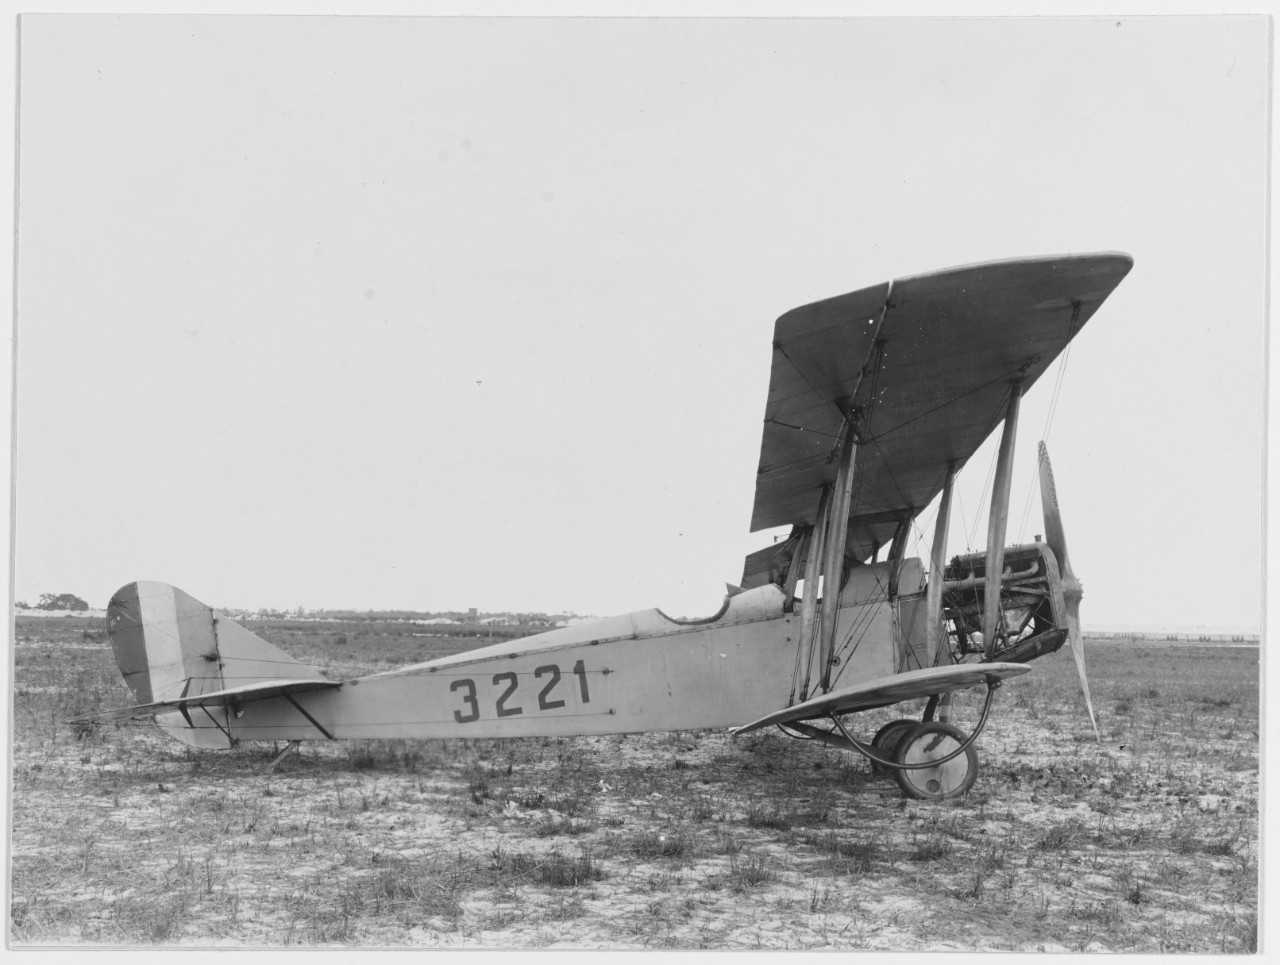 Curtiss JN-4H airplane (Bu. no. 3221), view of right side